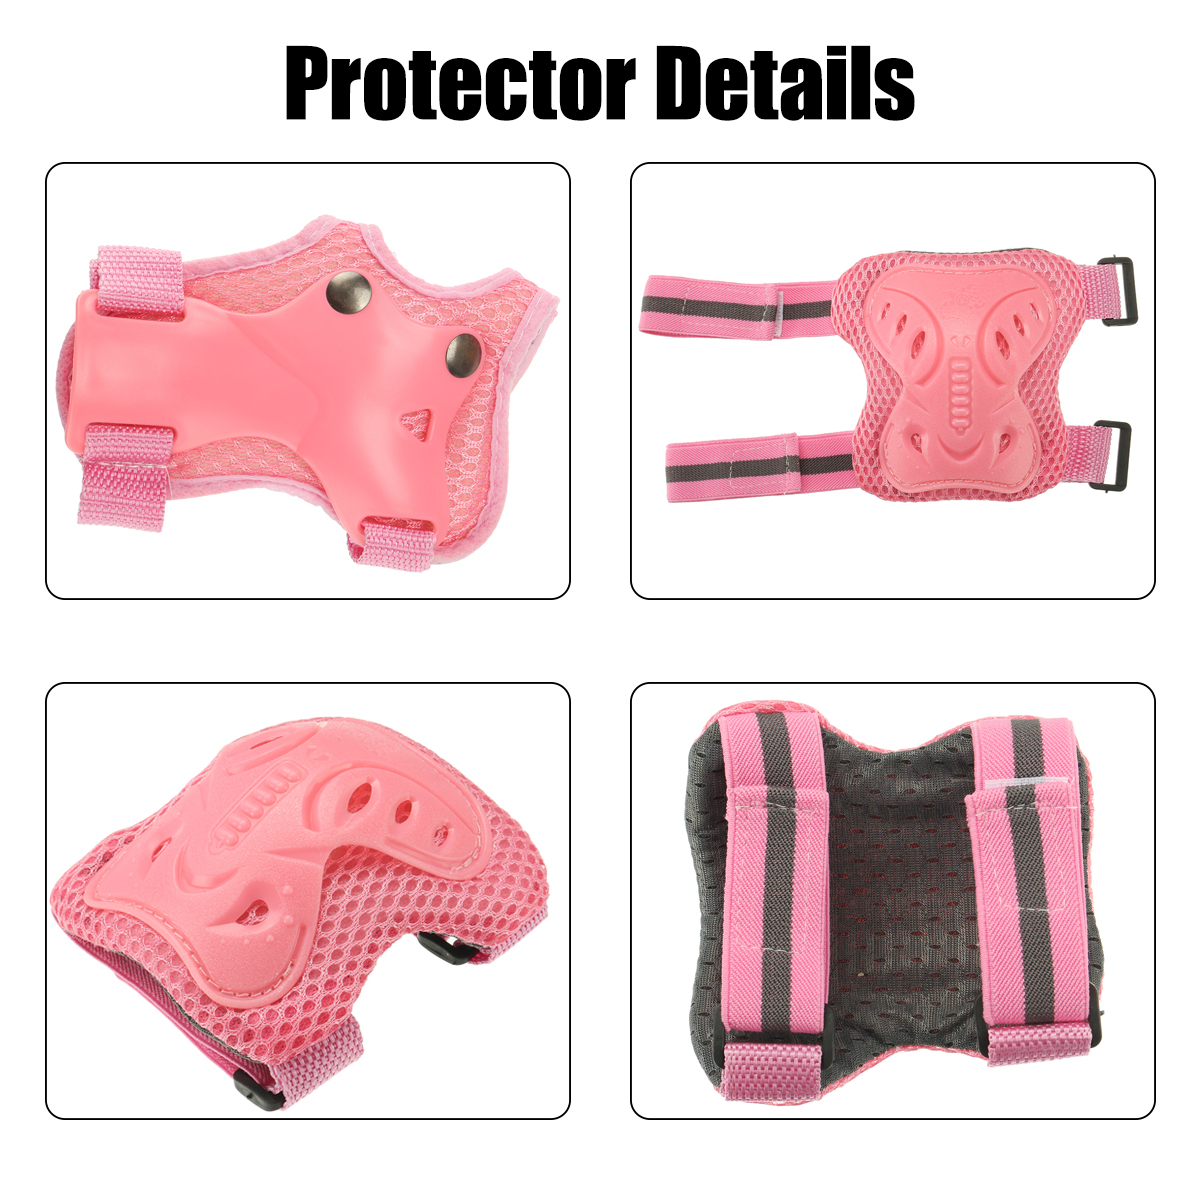 6PCS-Set-Adult-Children-KneeElbowWrist-Pads-Protective-Gears-for-Skateboard-Bicycle-Ice-Inline-Rolle-1796809-3